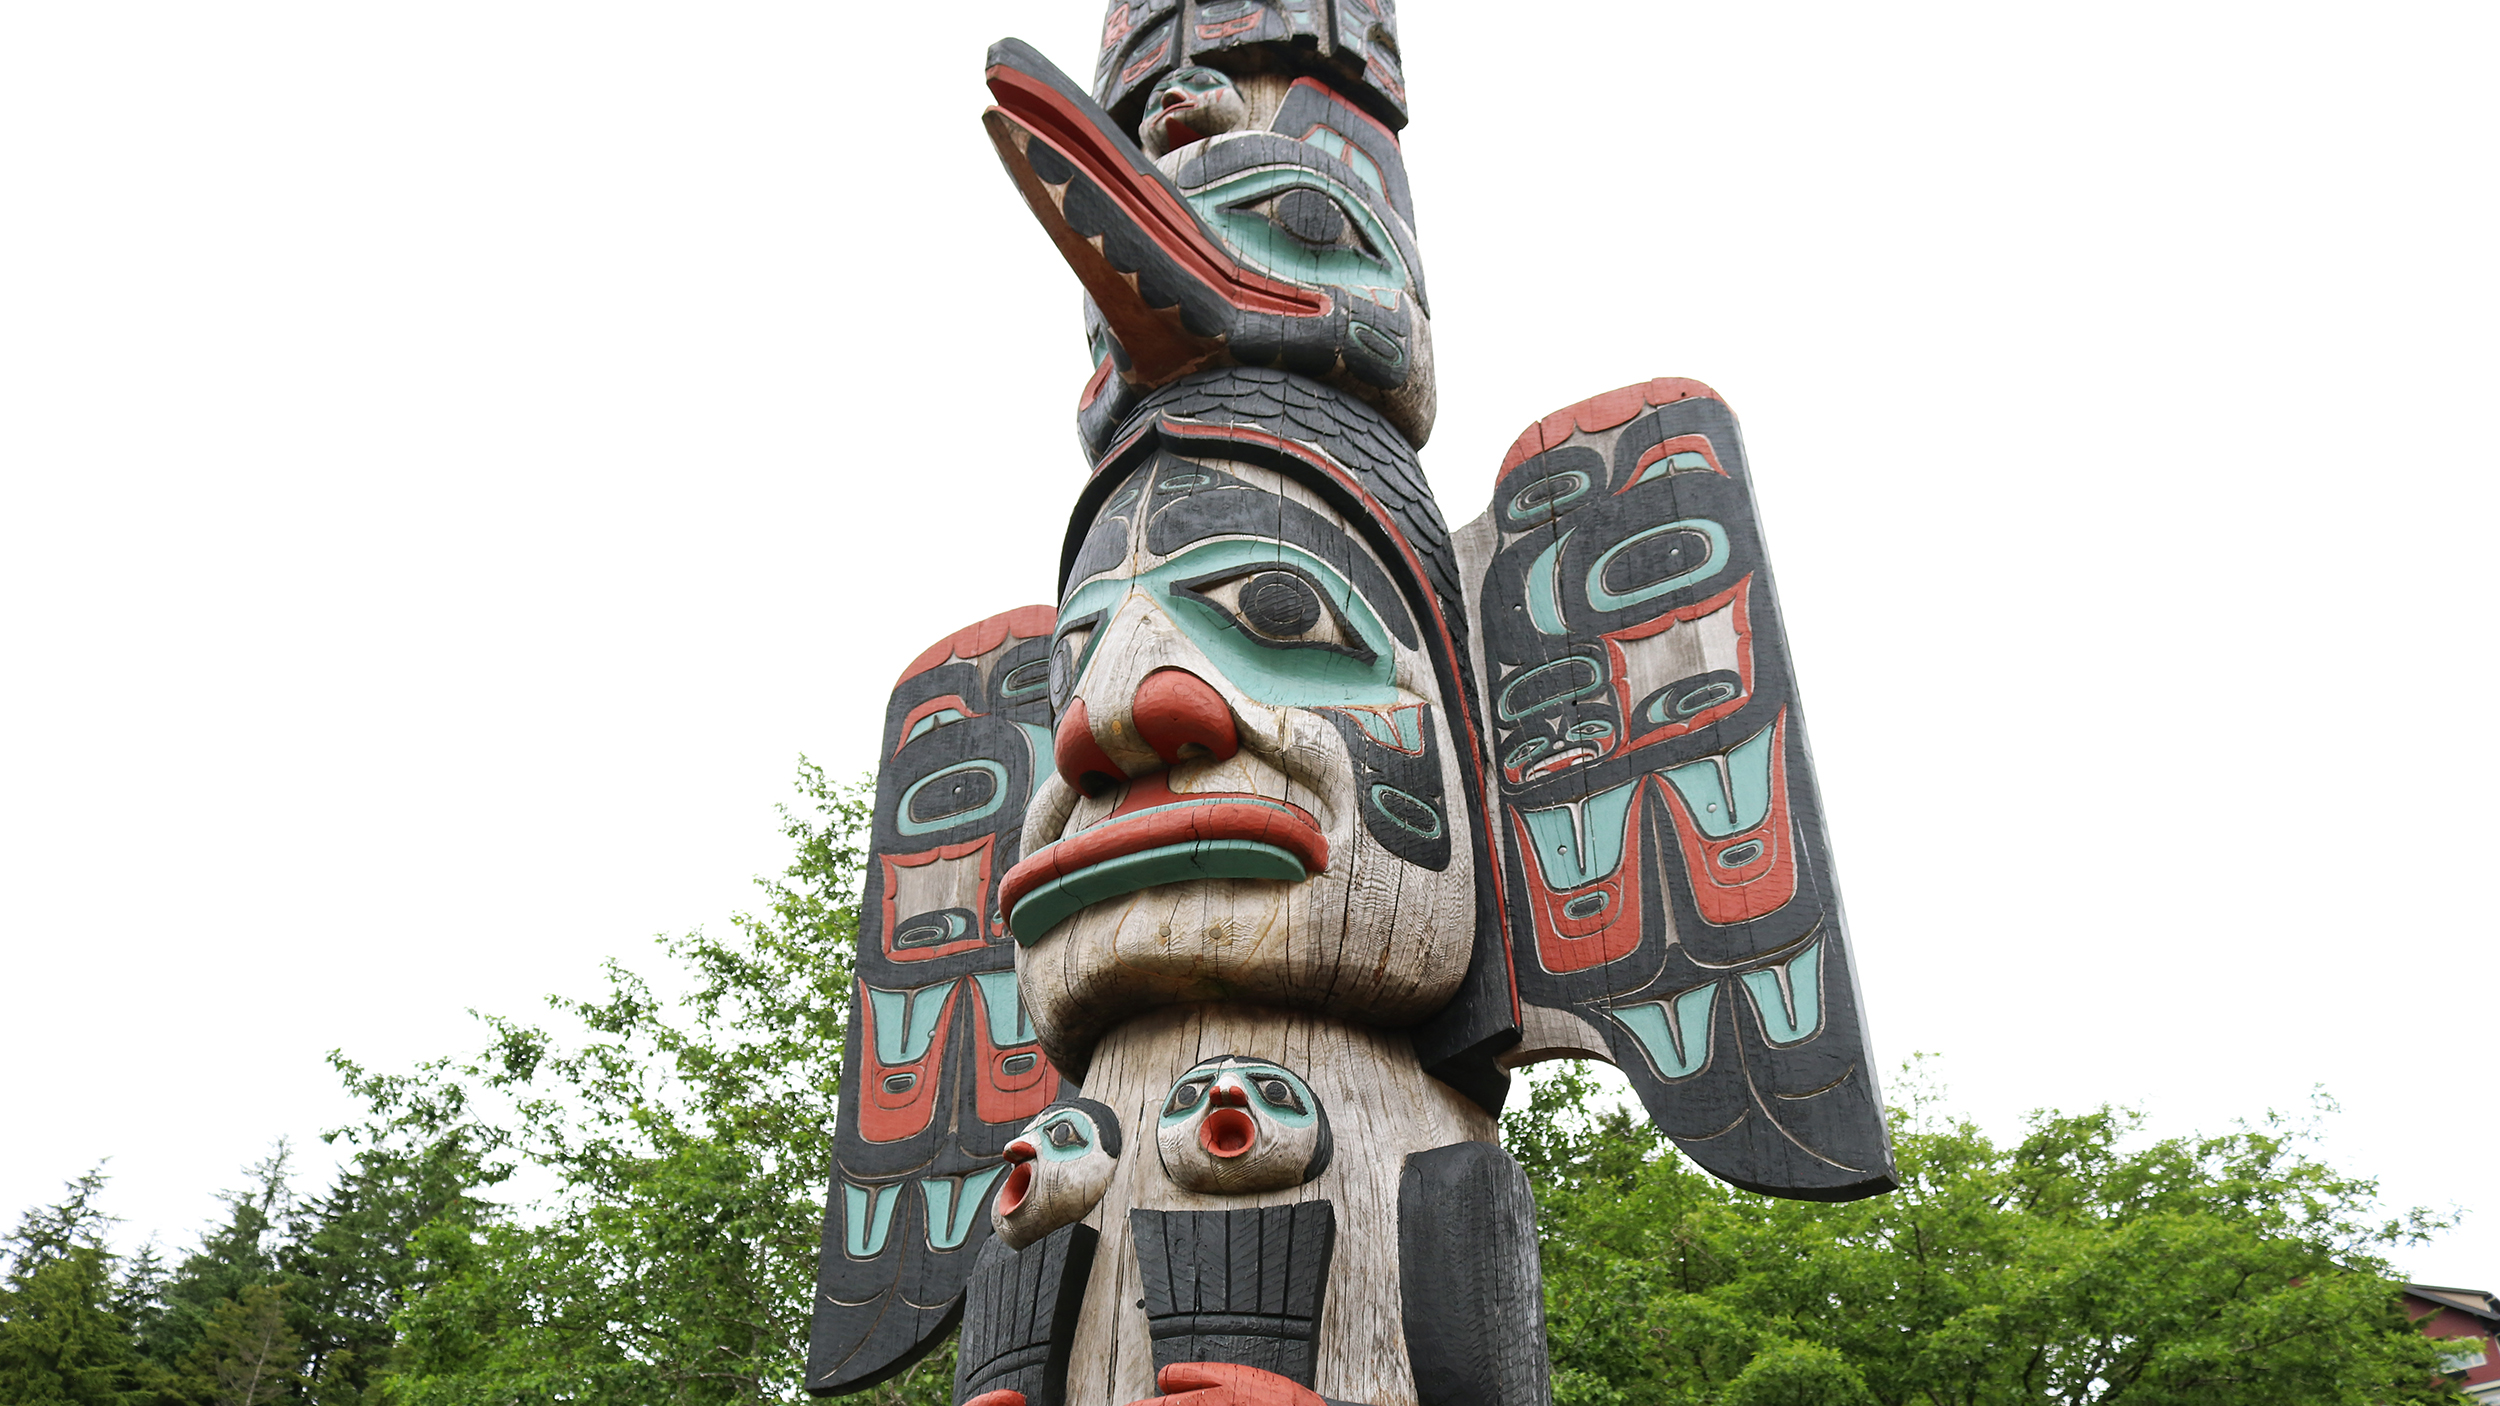 The Chief Johnson Totem Pole, first carved in 1902, recarved by Israel Shotridge in 1989, Ketchikan, Alaska